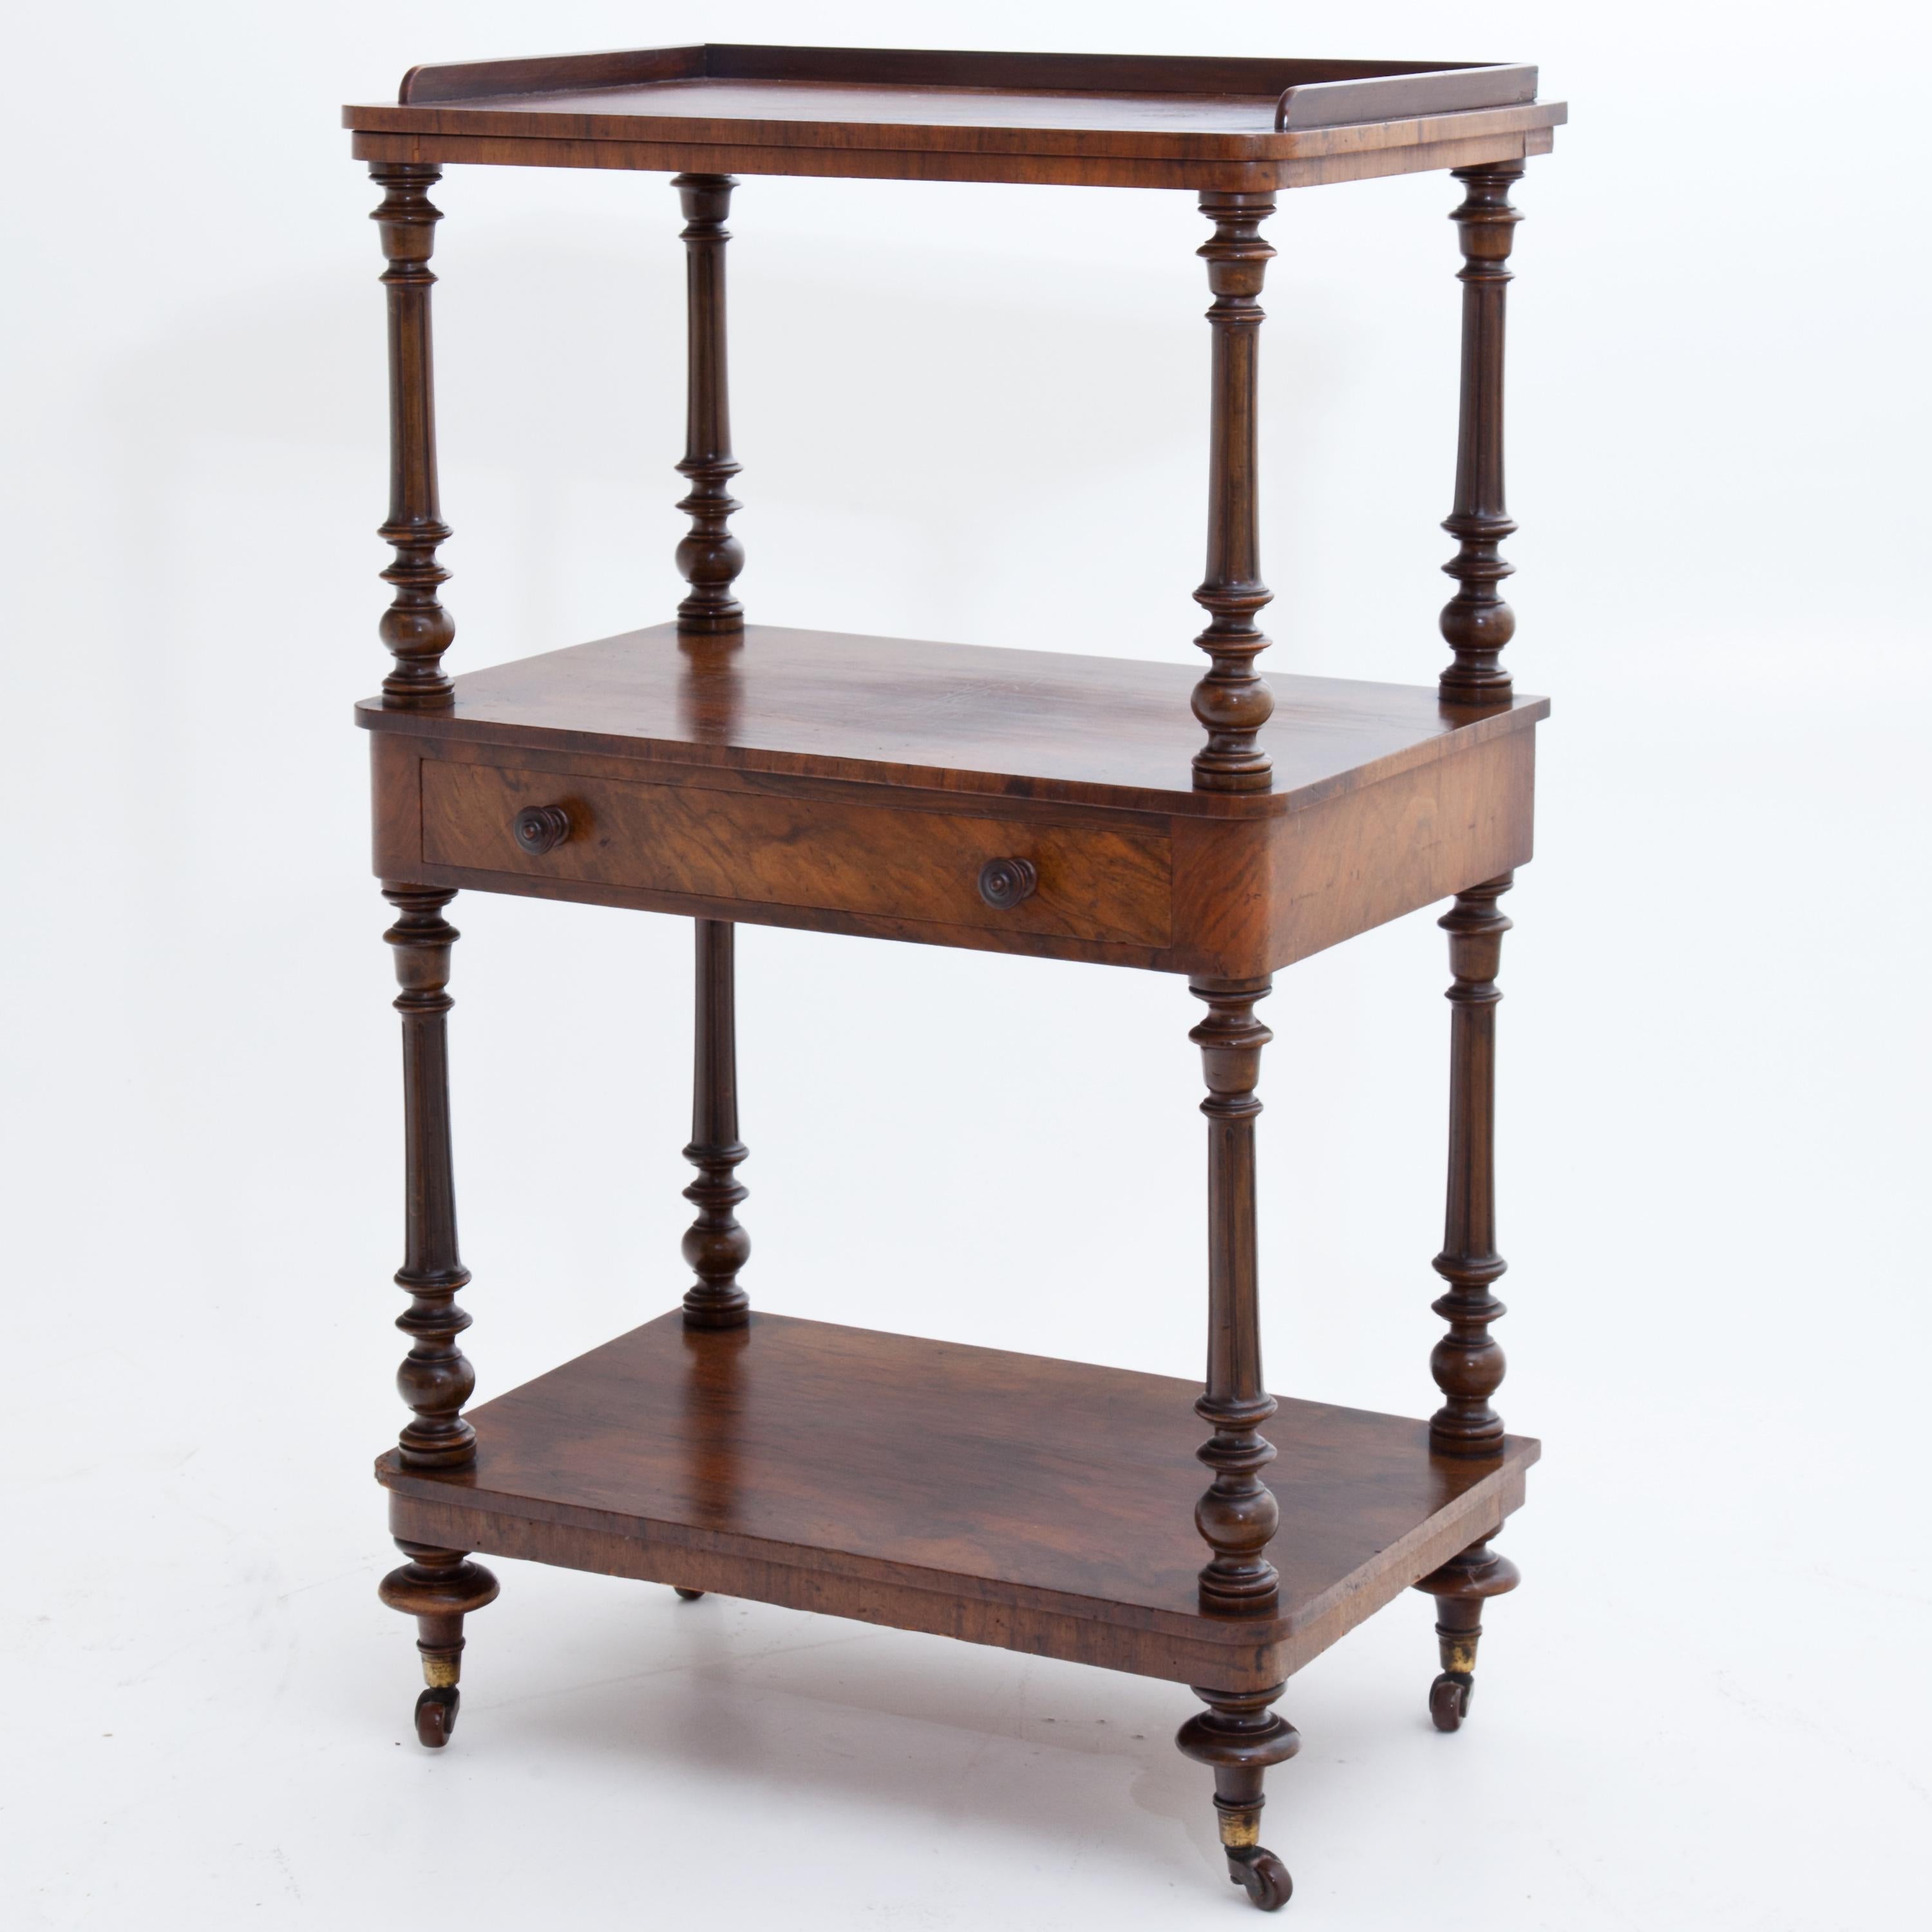 English two-tier walnut shelf on castors with one drawer and turned balustered columns.